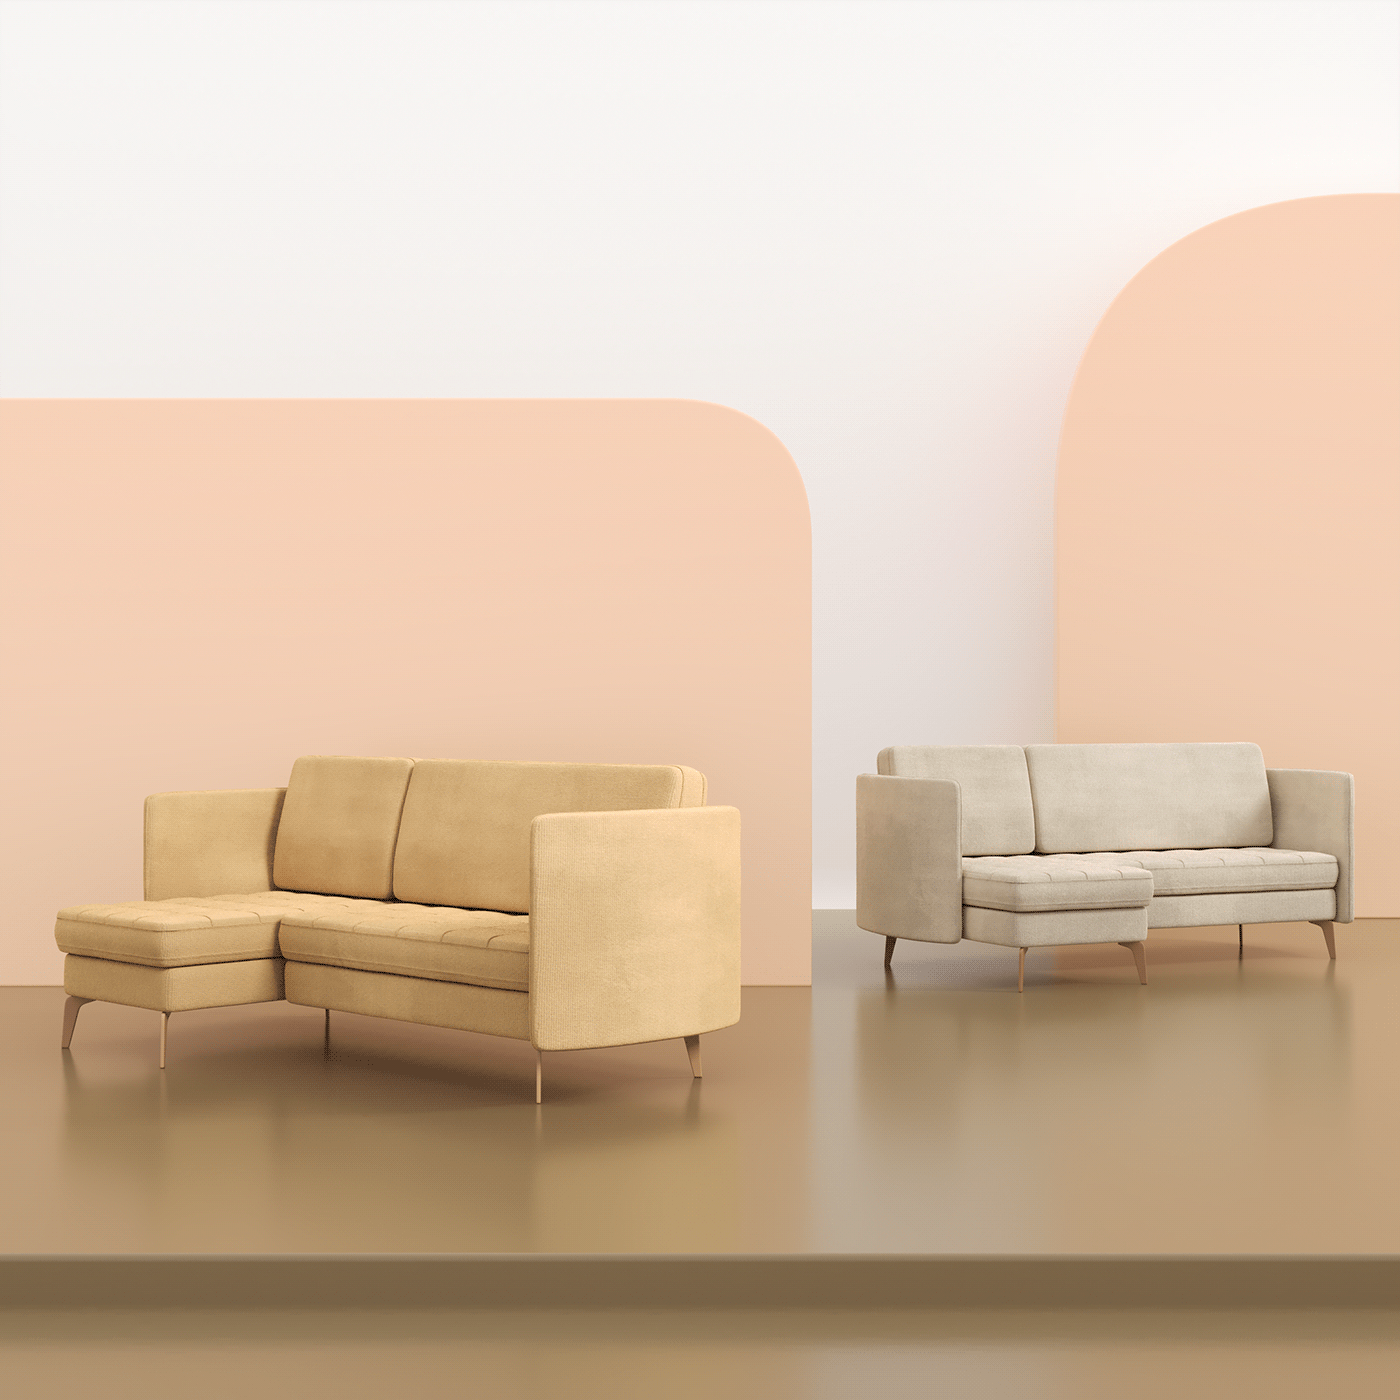 Couch sofa furniture Interior Render 3D visualization 3ds max CGI art direction 